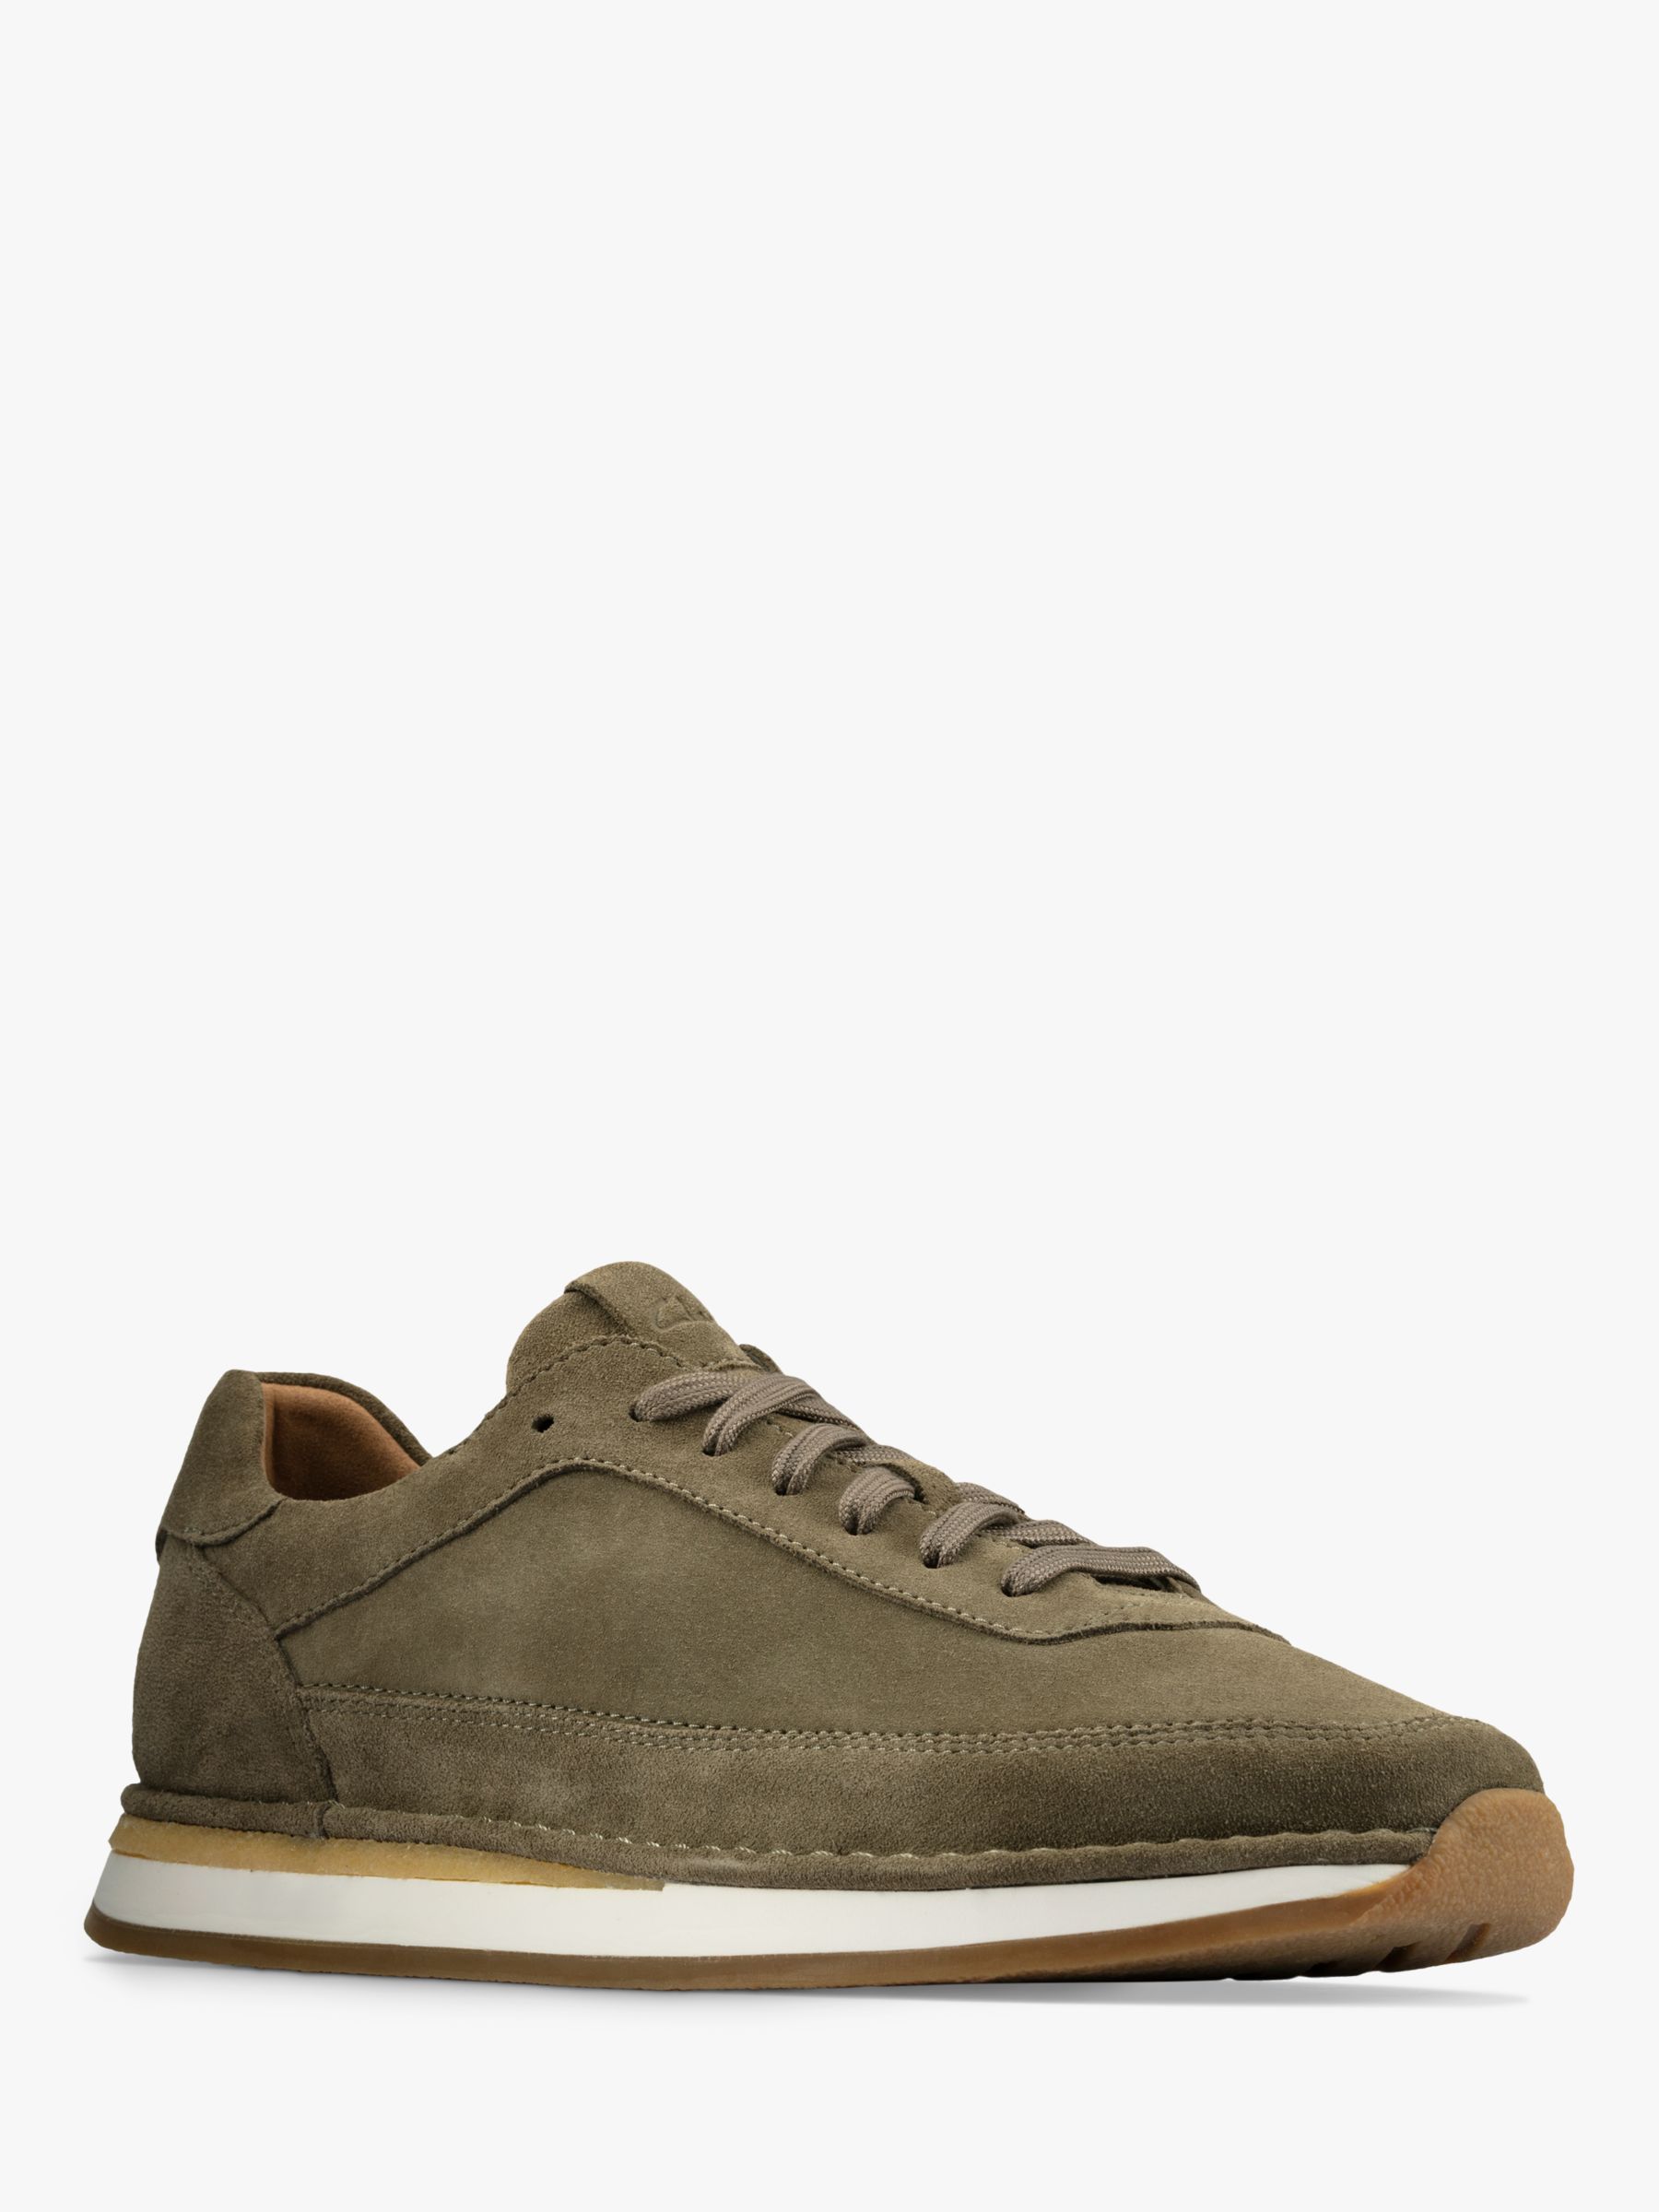 Clarks CraftRun Lace Trainers, Olive at John Lewis & Partners